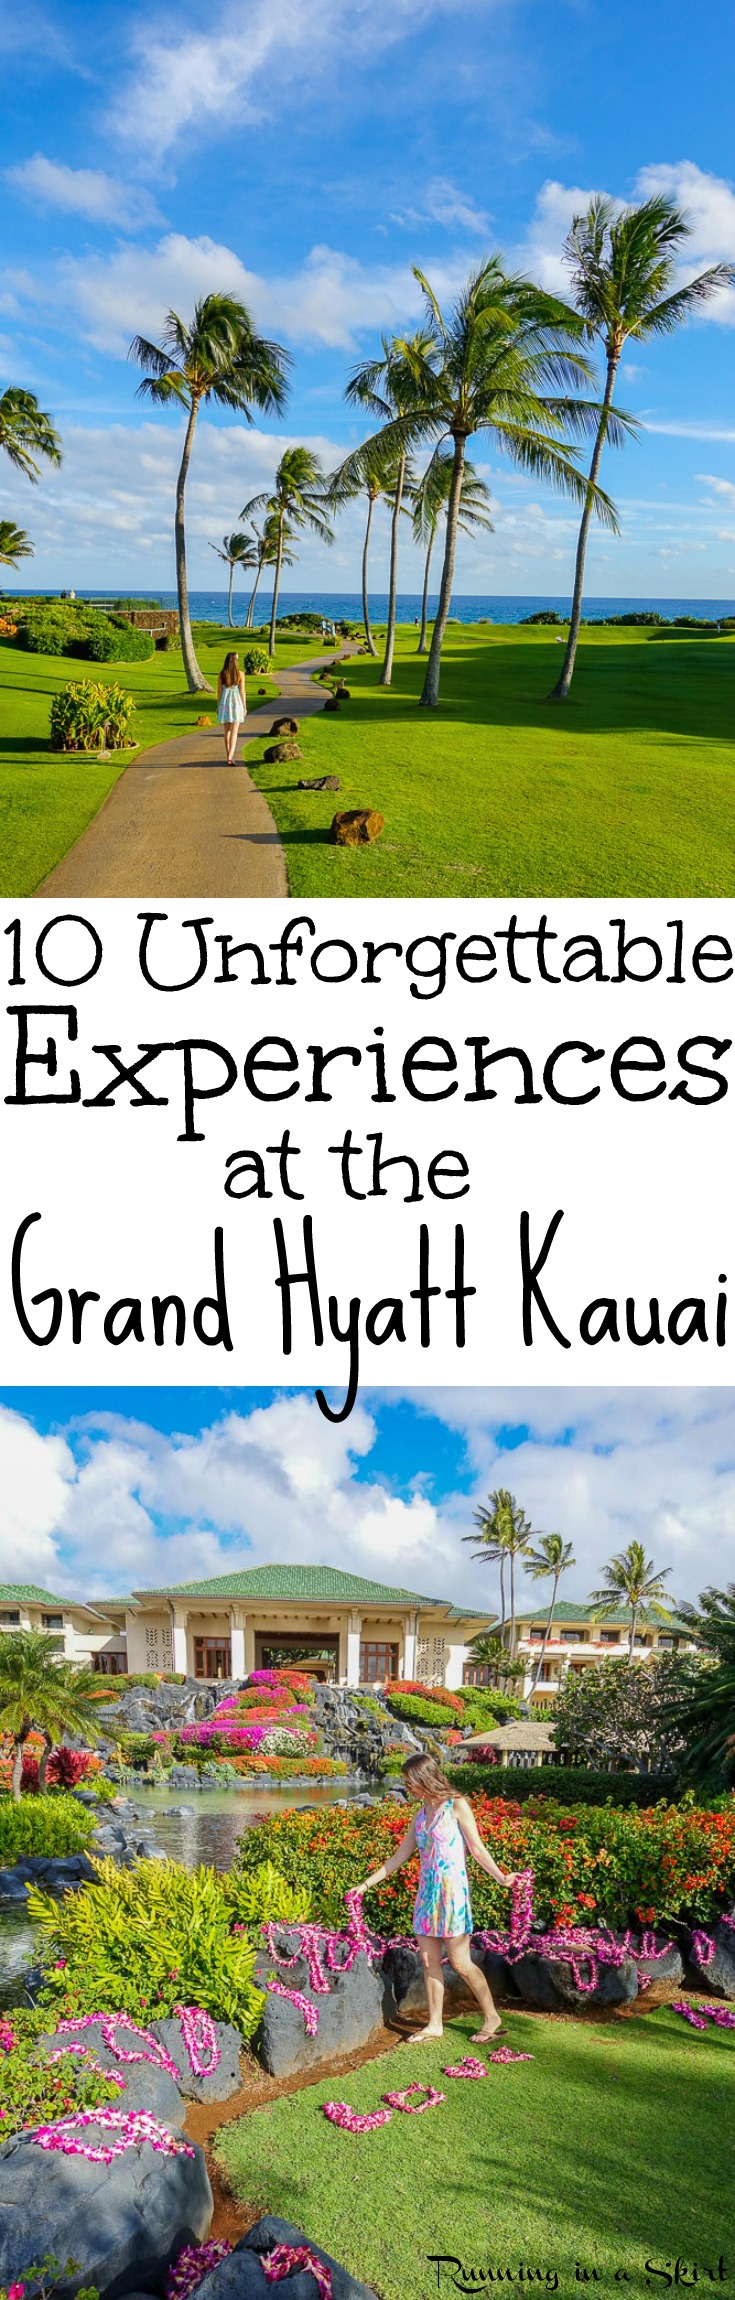 10 Unforgettable Experiences at the Grand Hyatt Kauai Resort and Spas - Hawaii - includes travel pictures of the rooms, pools, beaches, breakfasts, activities, gardens and sunrise. Also dinner at Tidepools, one of the best restaurants on Kauai. This is a favorite Kauai Resort for Honeymoons and luxury hotels in paradise! / Running in a Skirt via @juliewunder